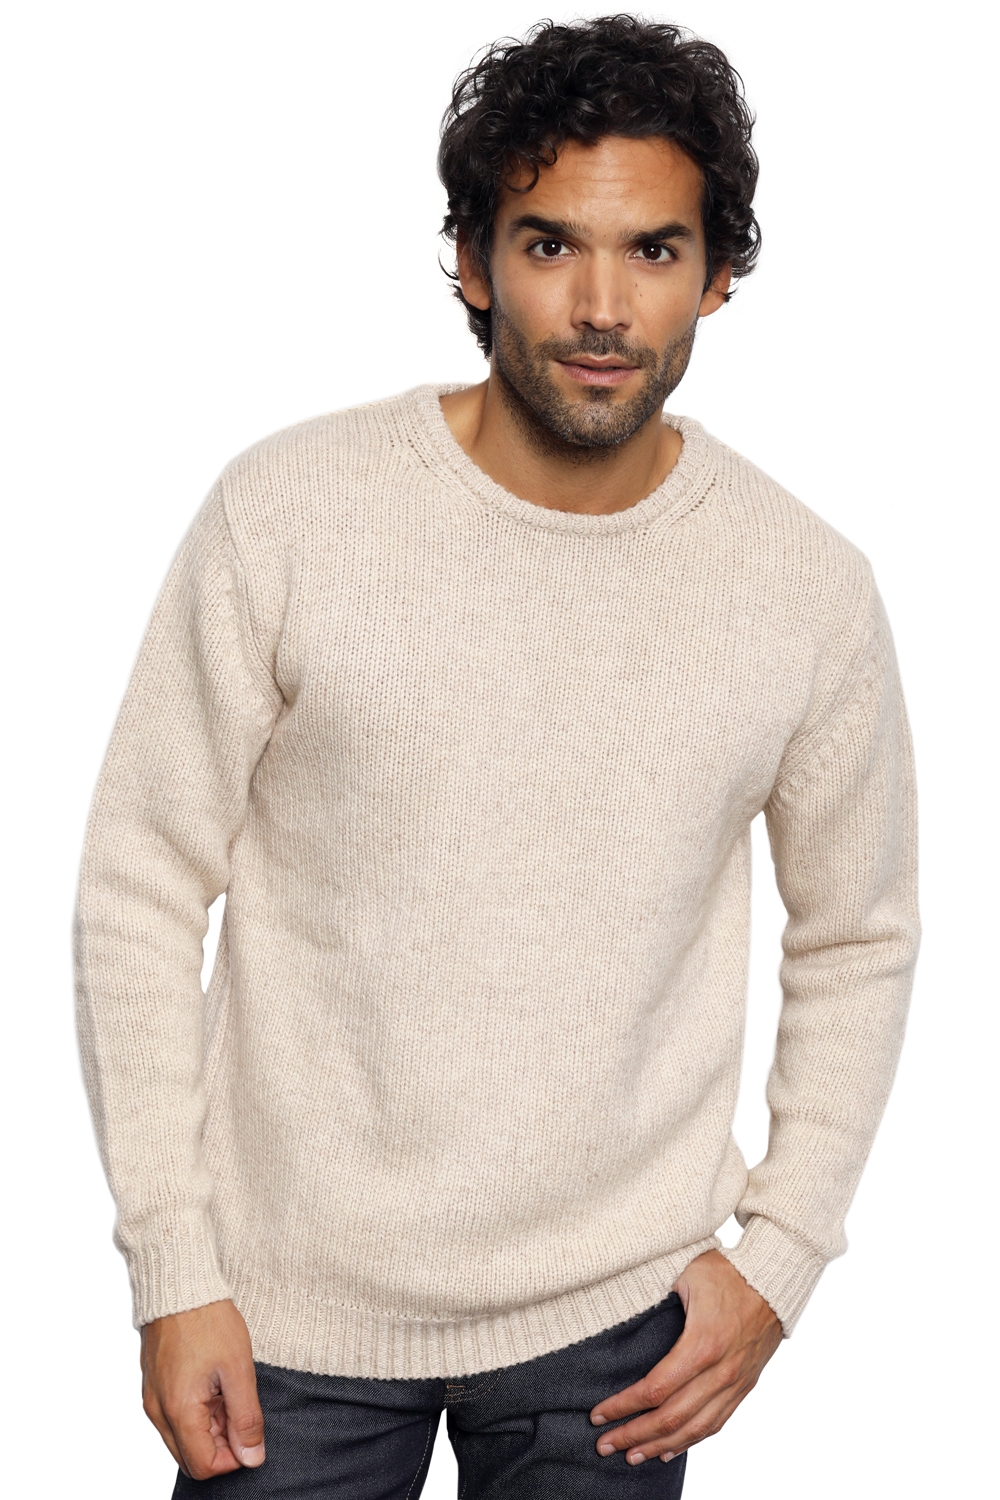 Chameau pull homme col rond cole nature 3xl